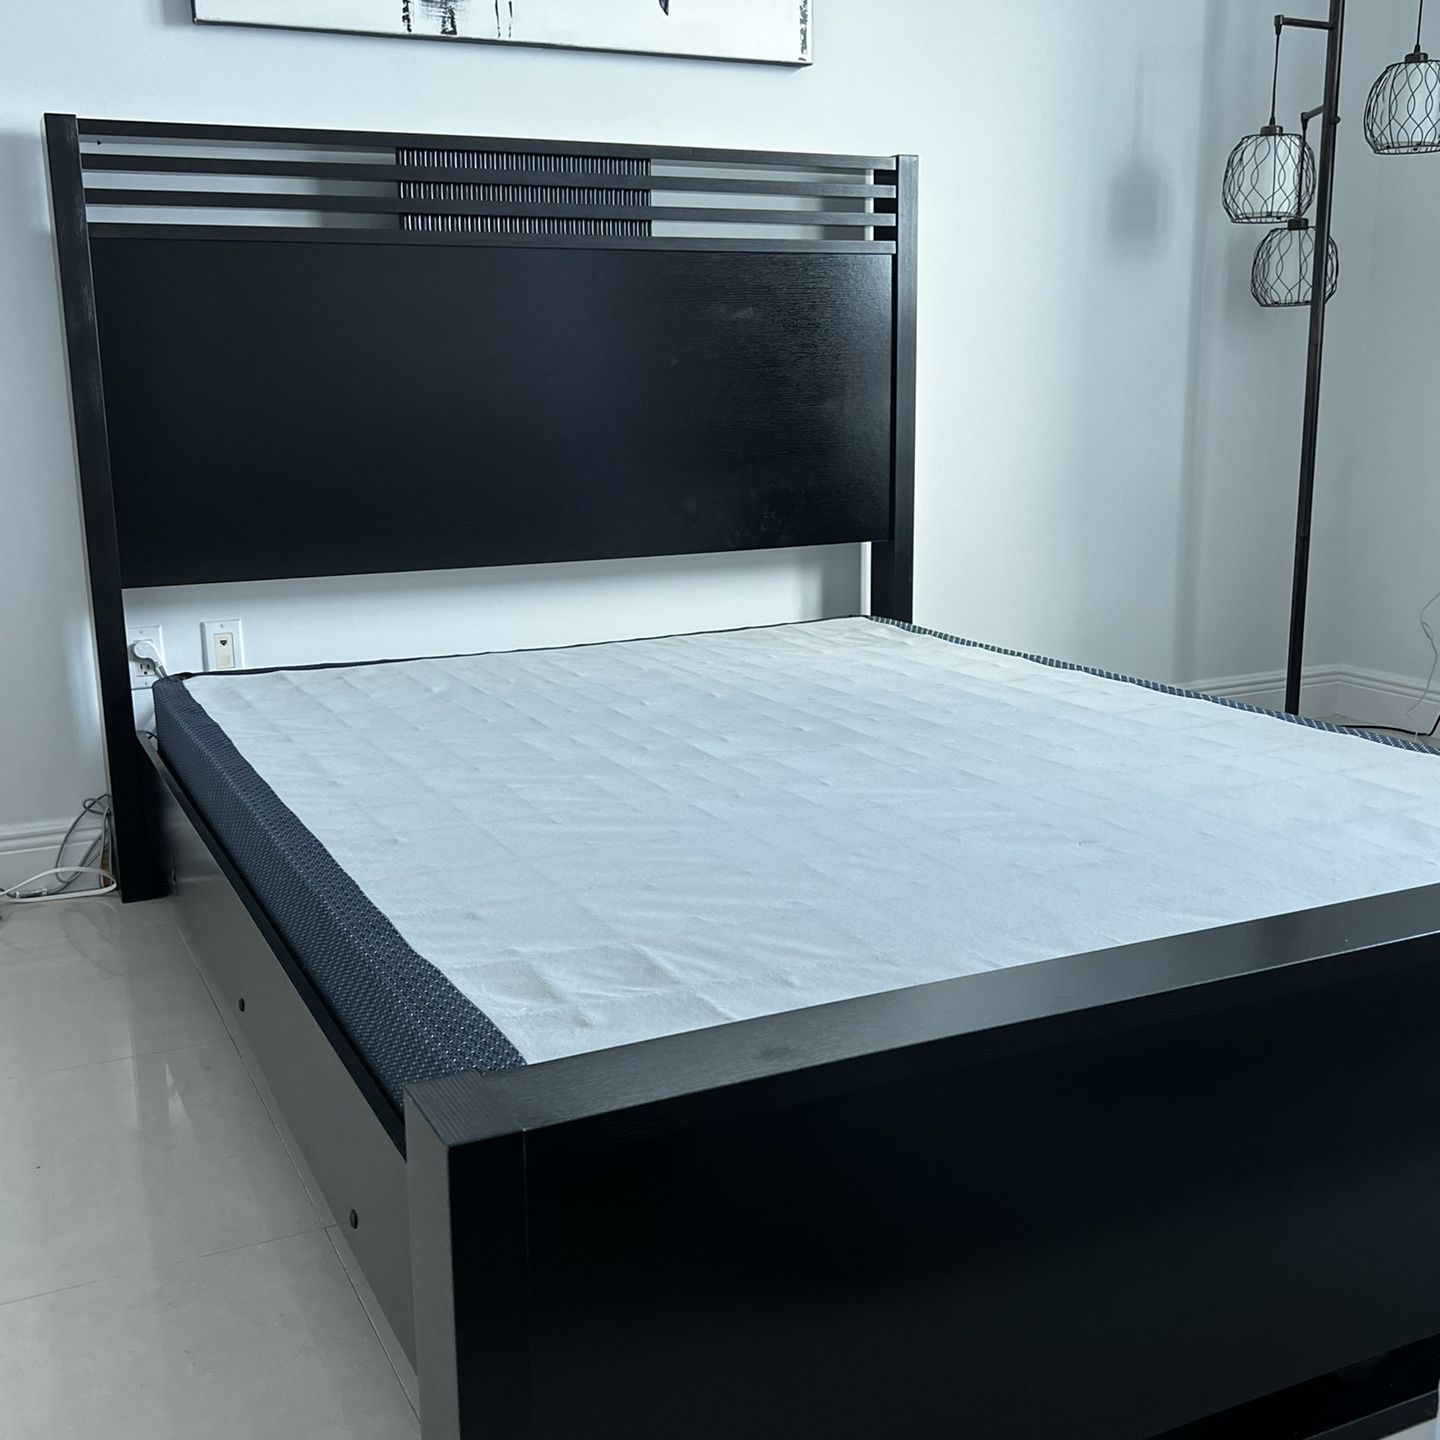 Queen Wooded Black Bed Frame On Sale